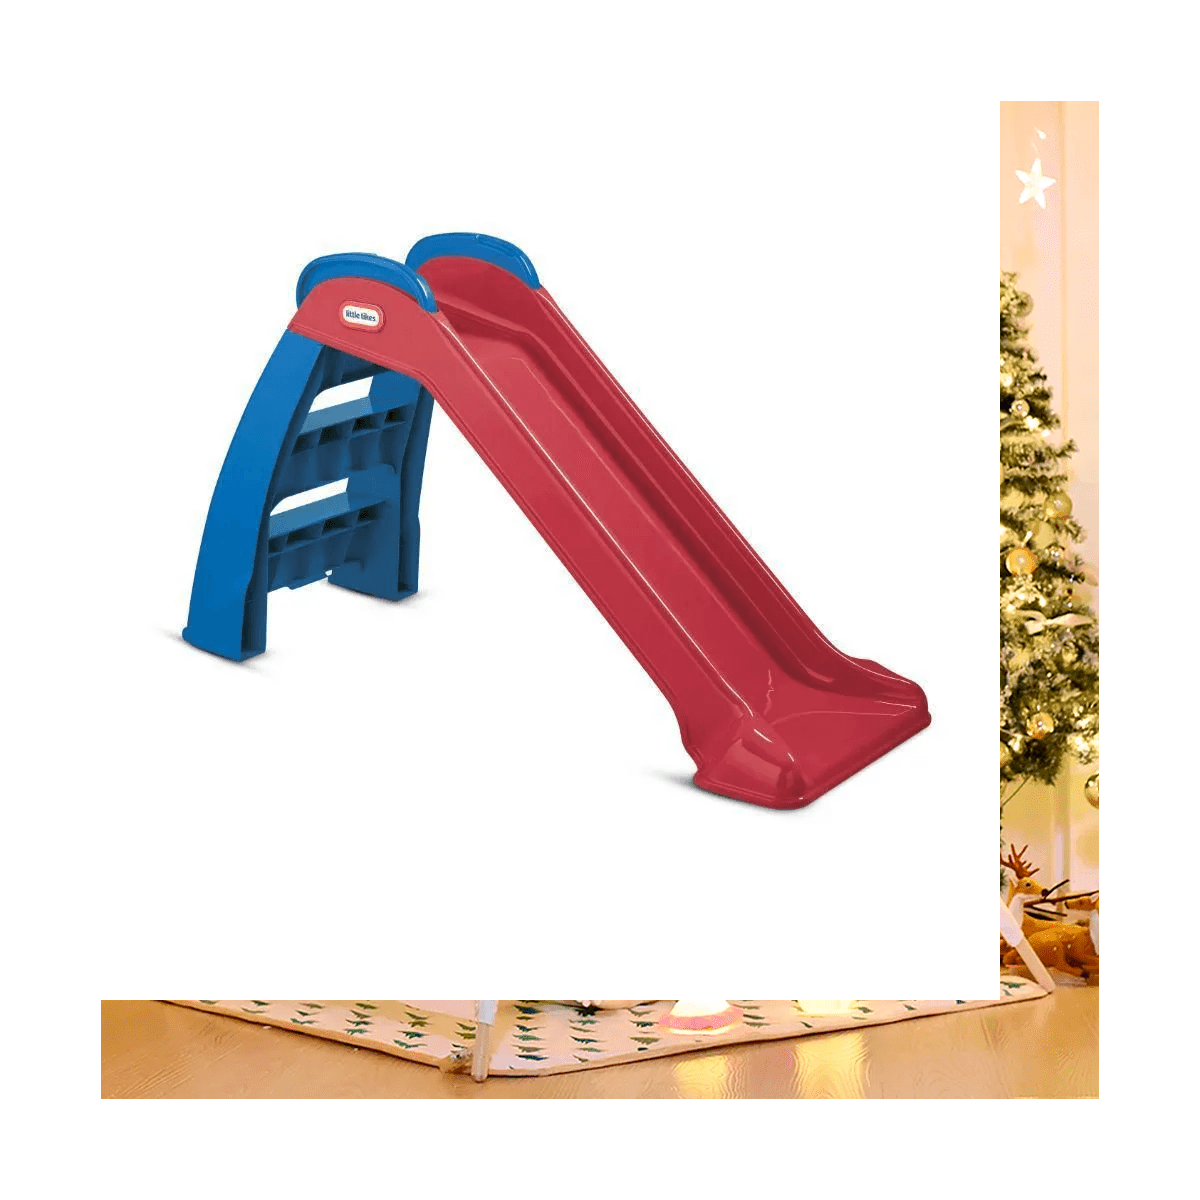 Juguete Little Tikes First Slide Red y Blue